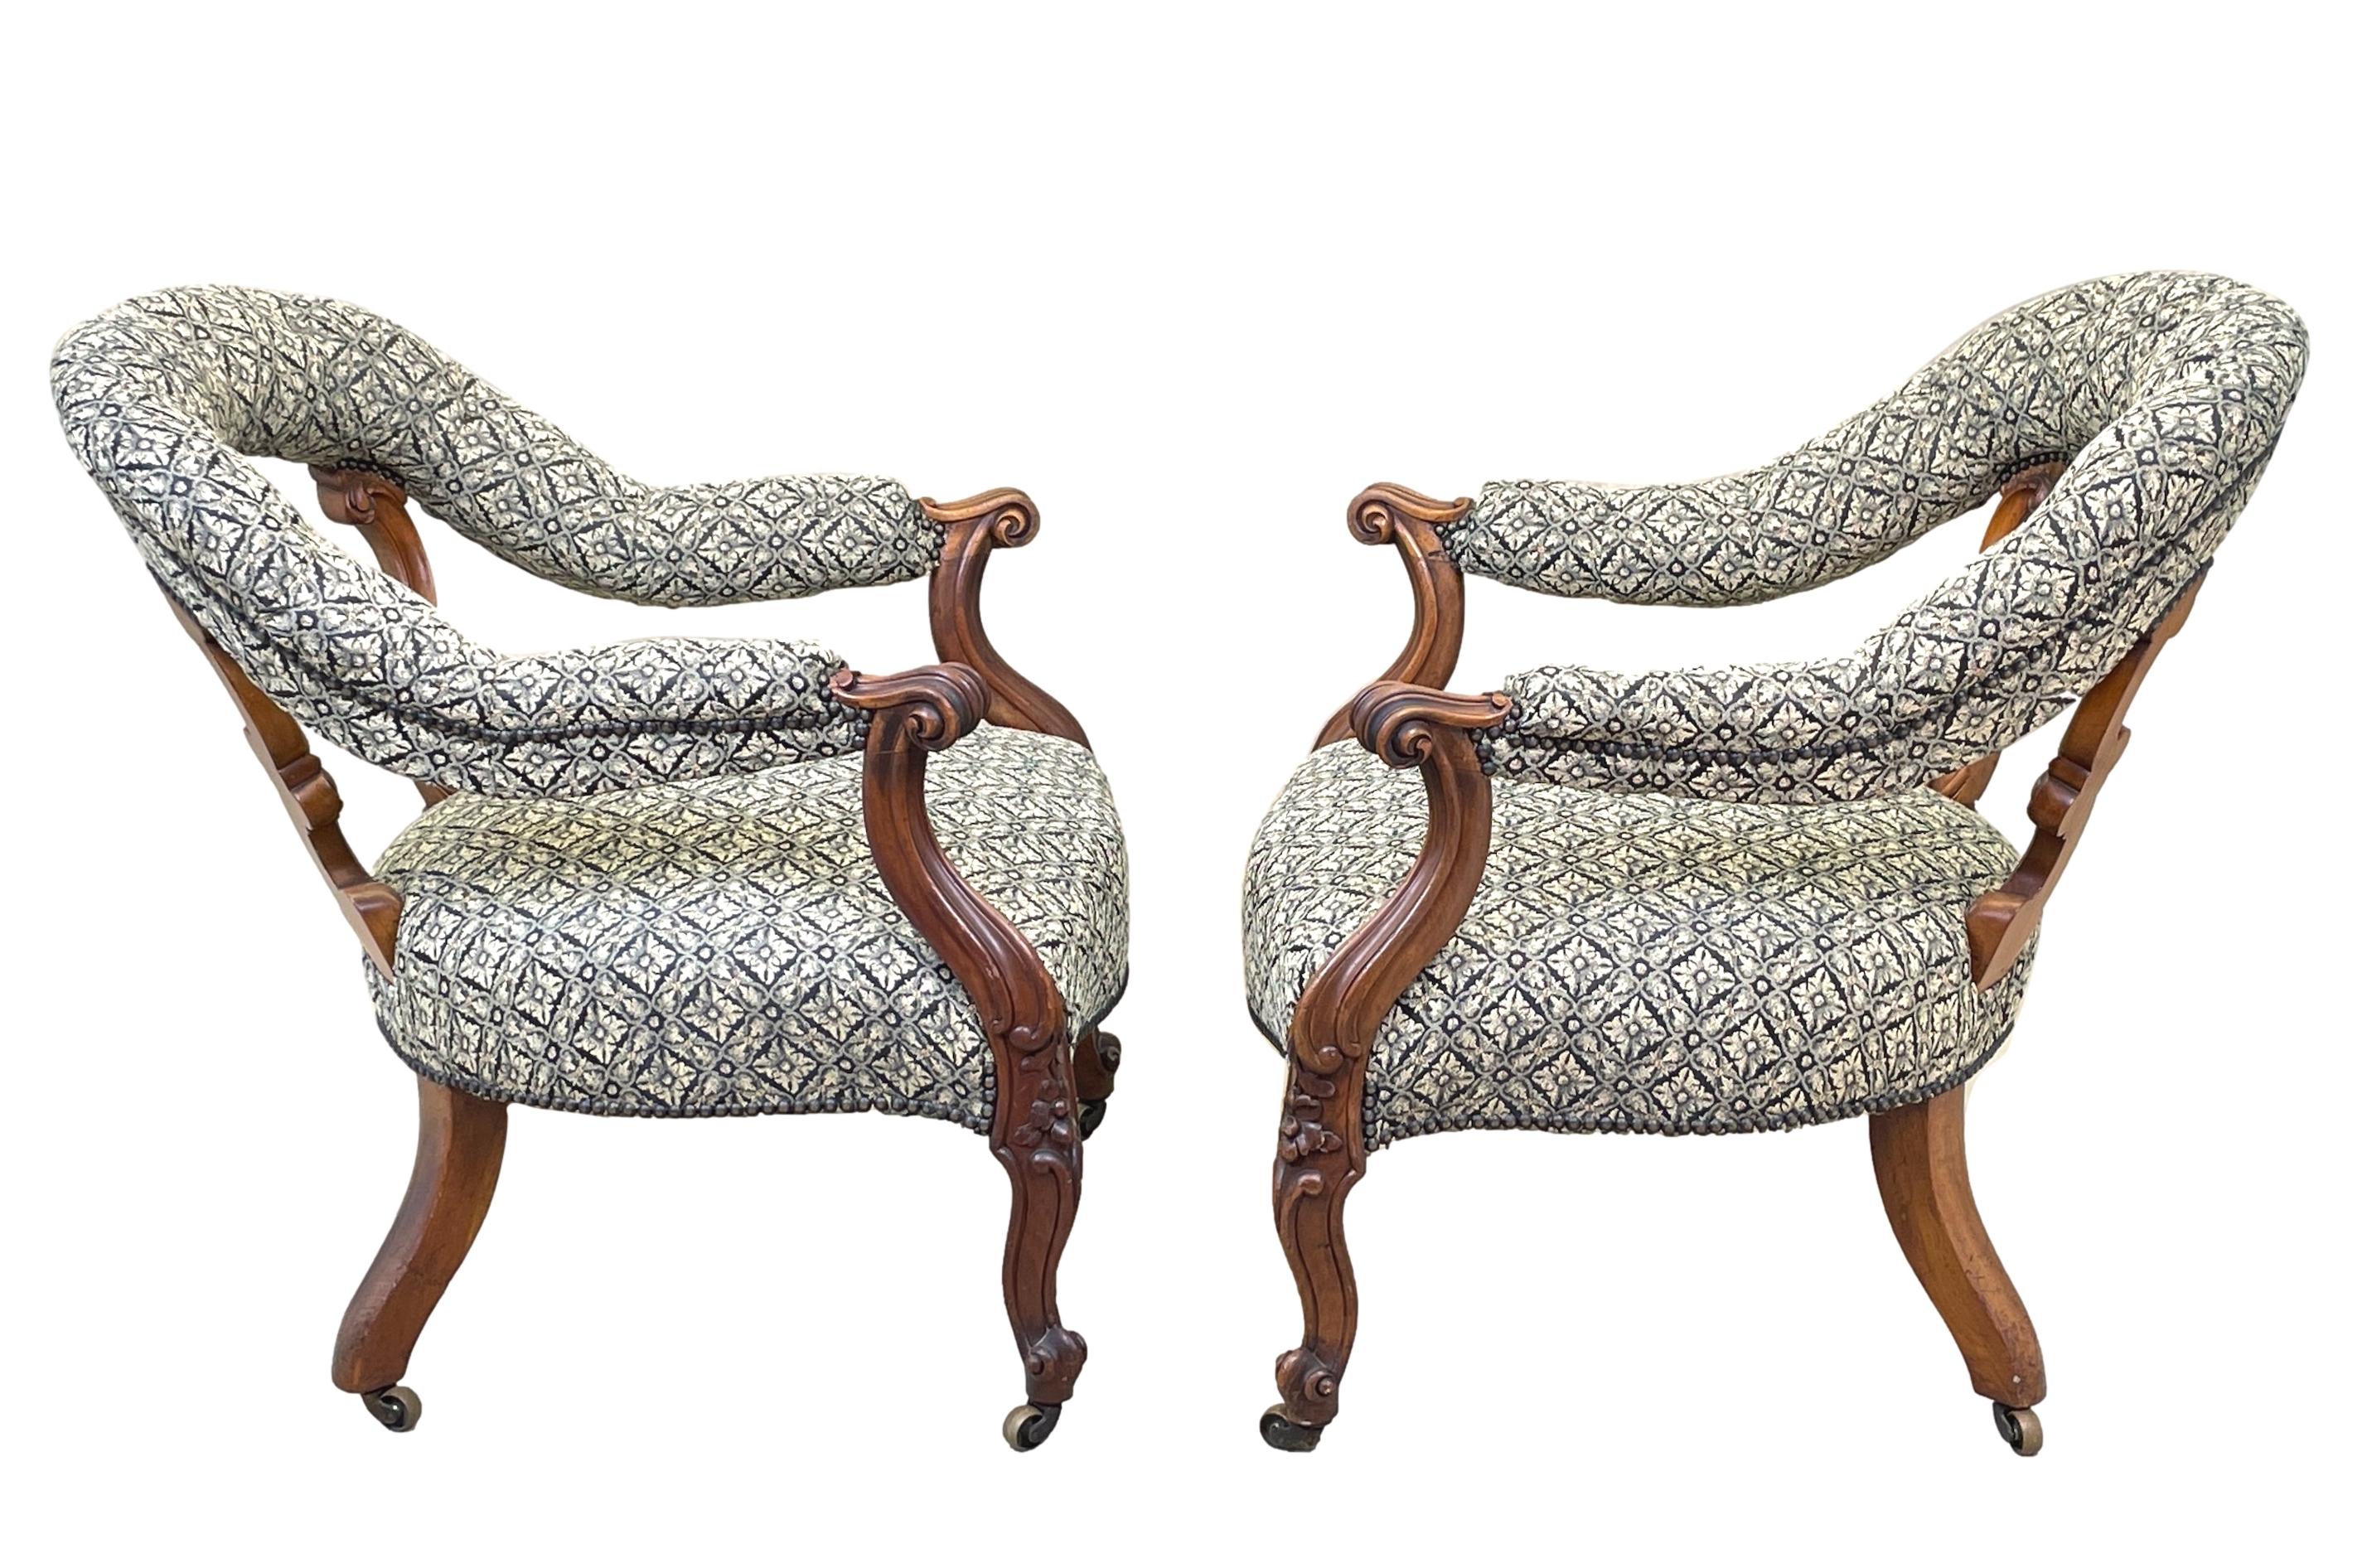 A very good quality pair of mid 19th century Victorian walnut tub library armchairs having unusual hoop type open backs with carved c scroll type upright supports over seat with scrolling arms raised on elegant carved cabriole legs and